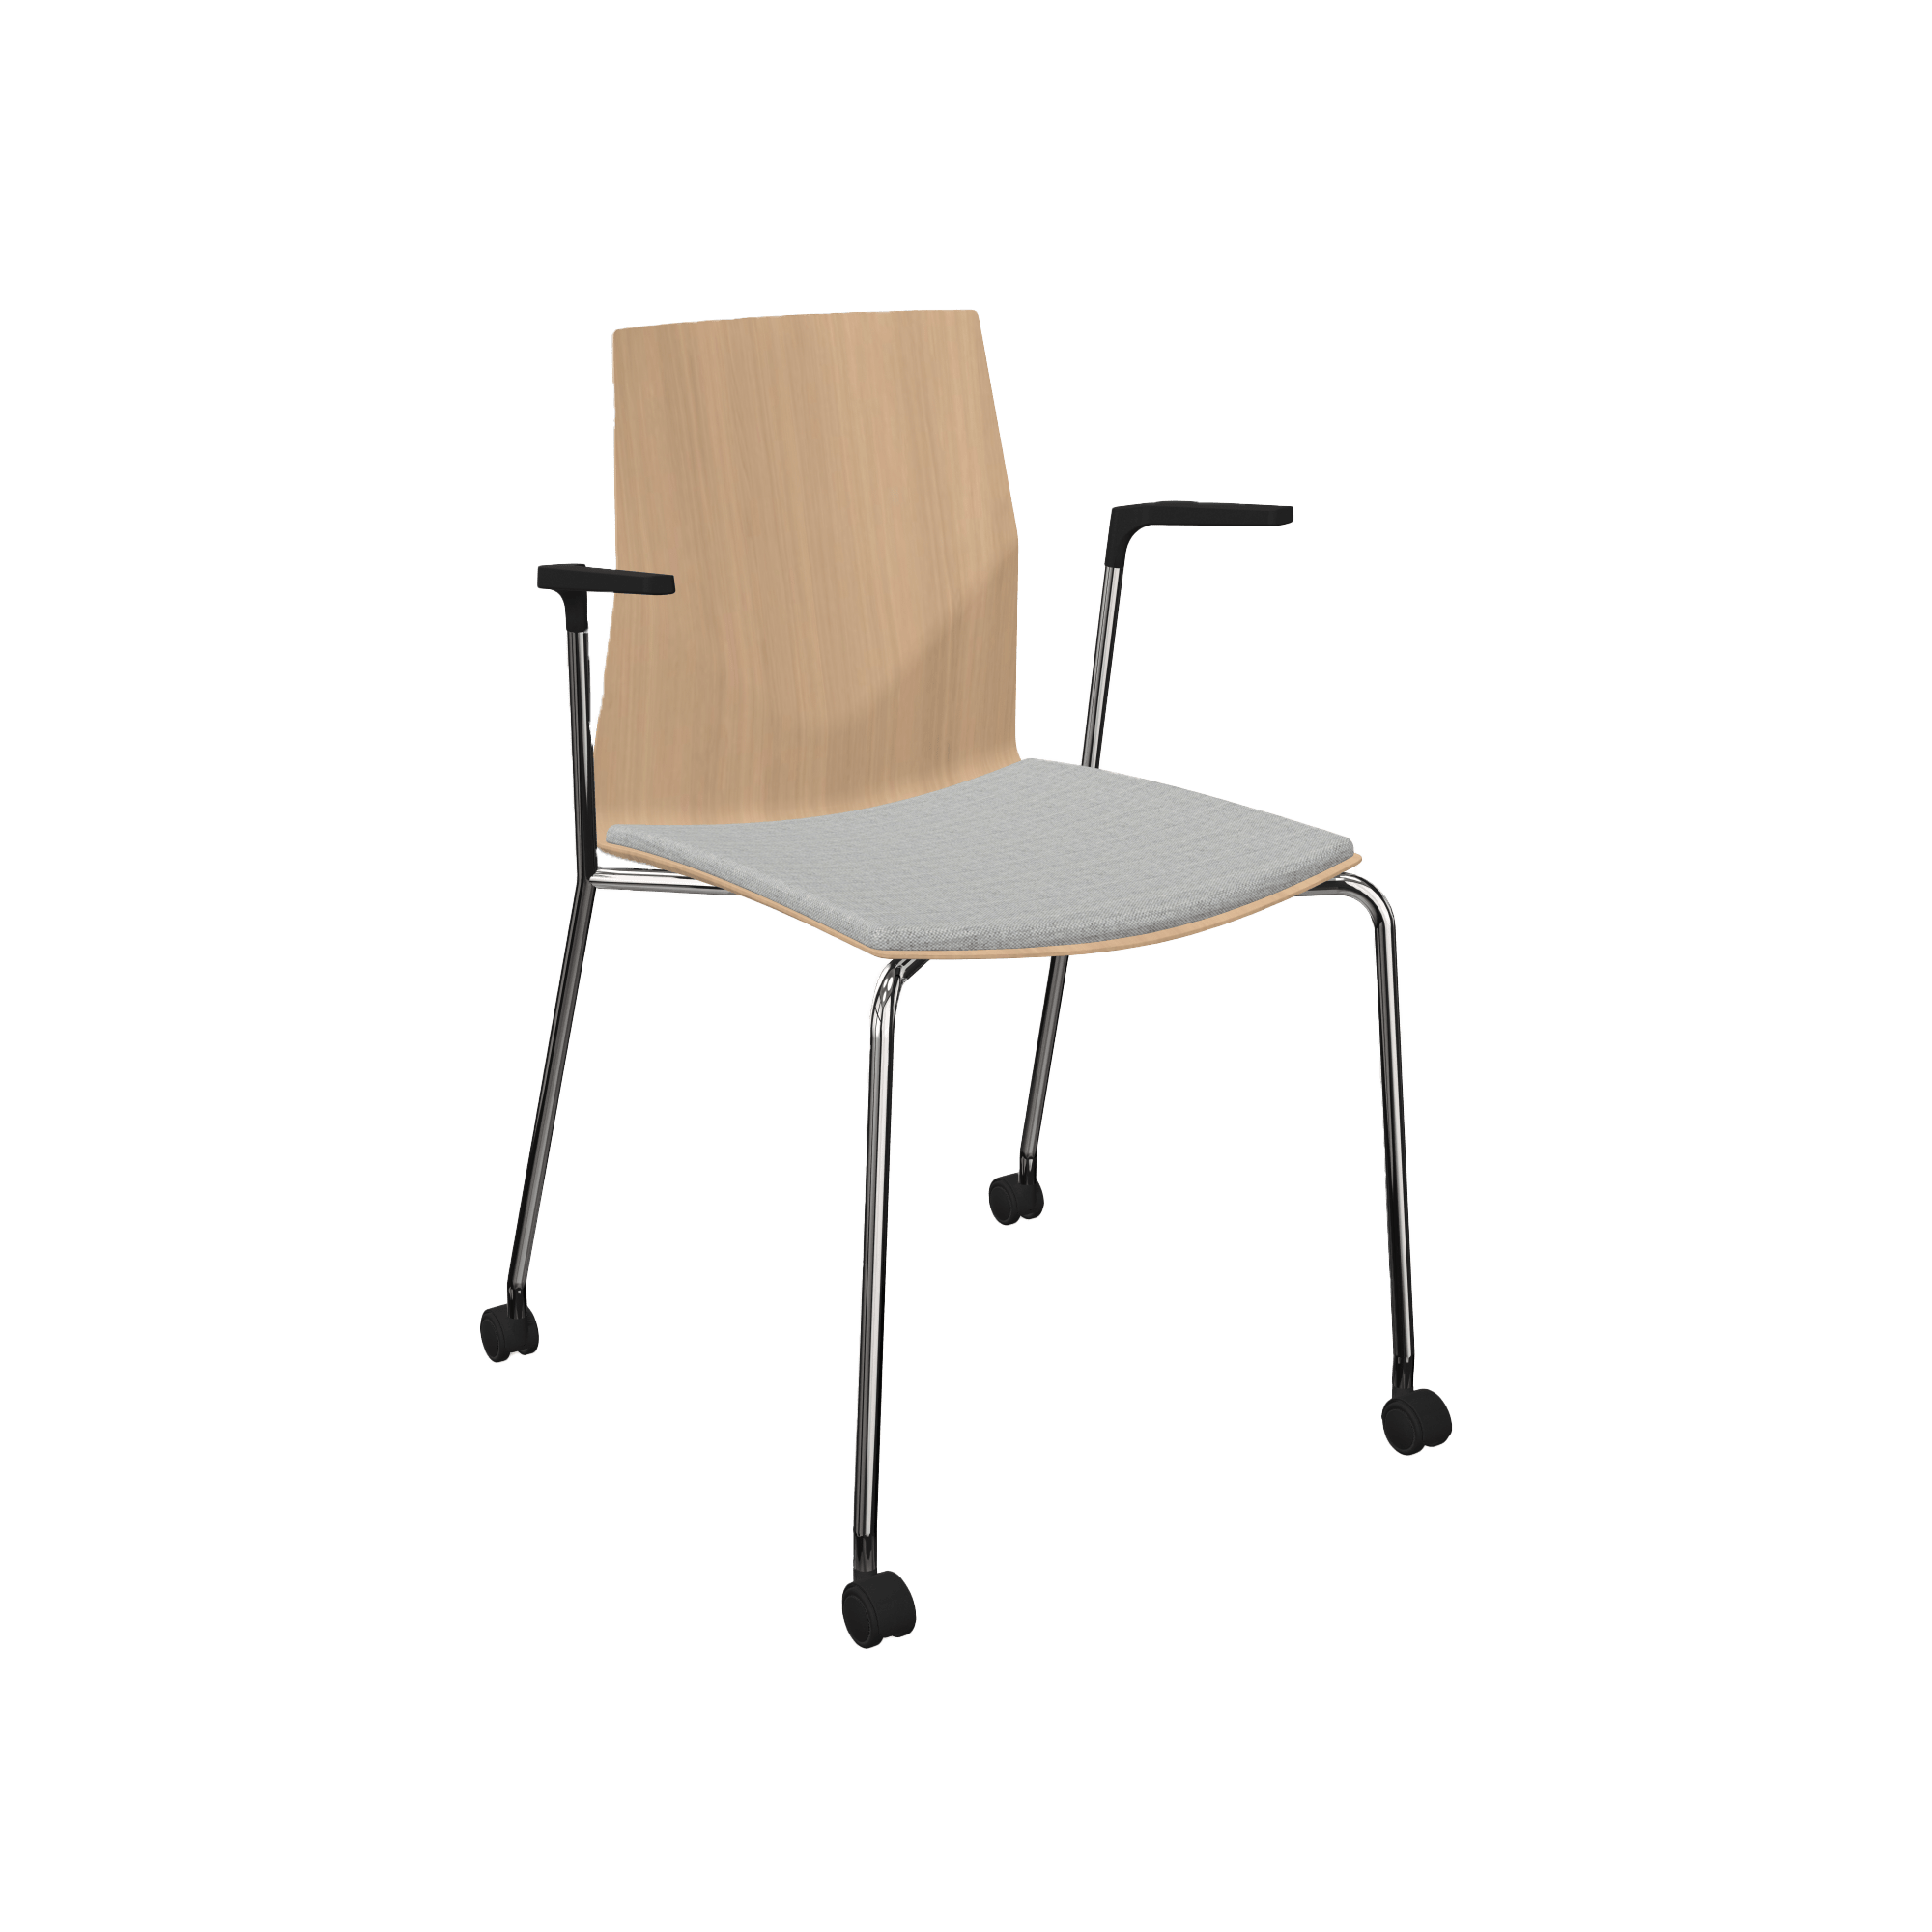 wooden chair with grey seat and arm rests